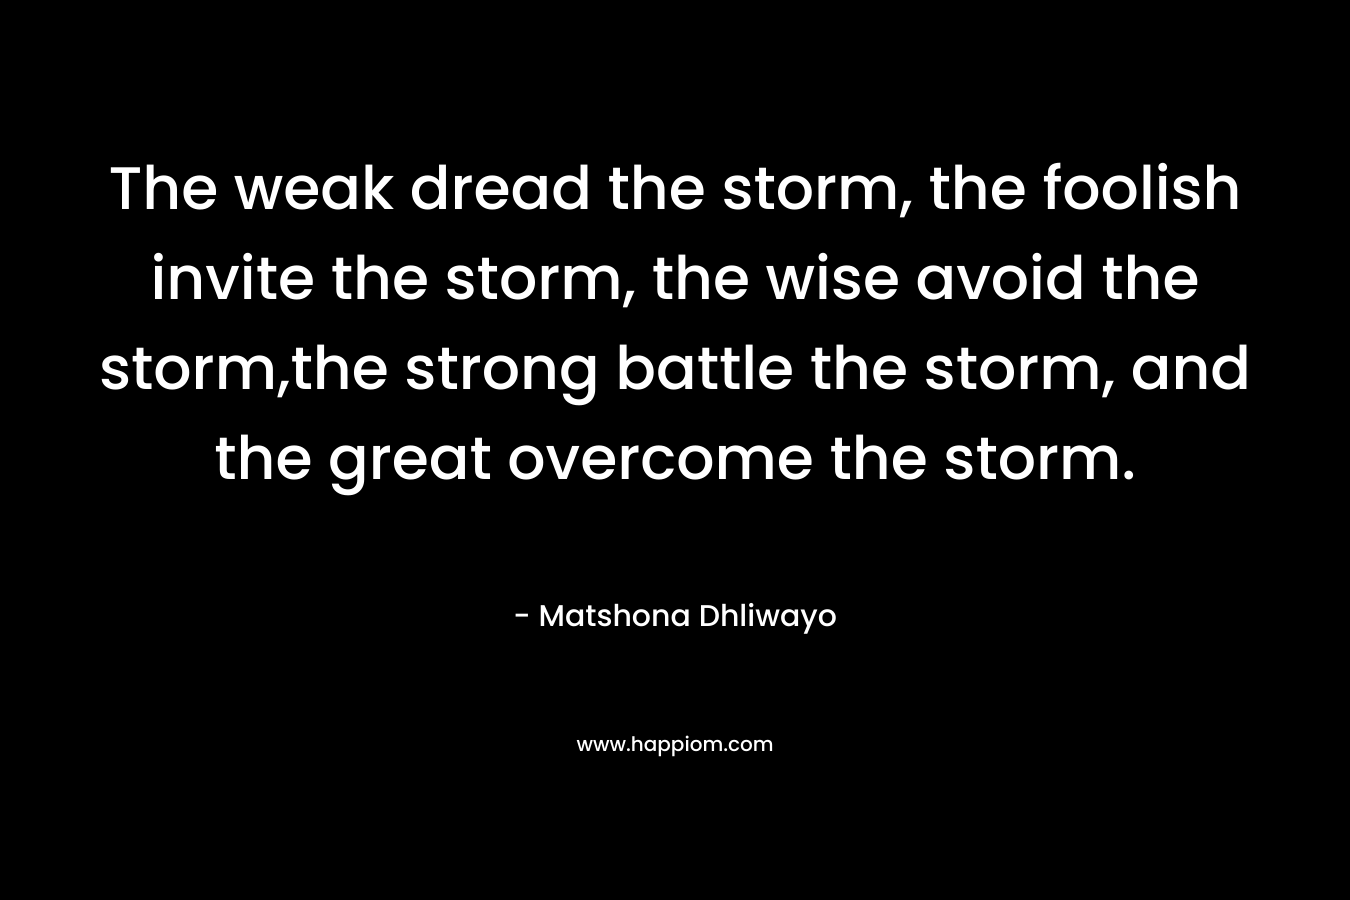 The weak dread the storm, the foolish invite the storm, the wise avoid the storm,the strong battle the storm, and the great overcome the storm. – Matshona Dhliwayo